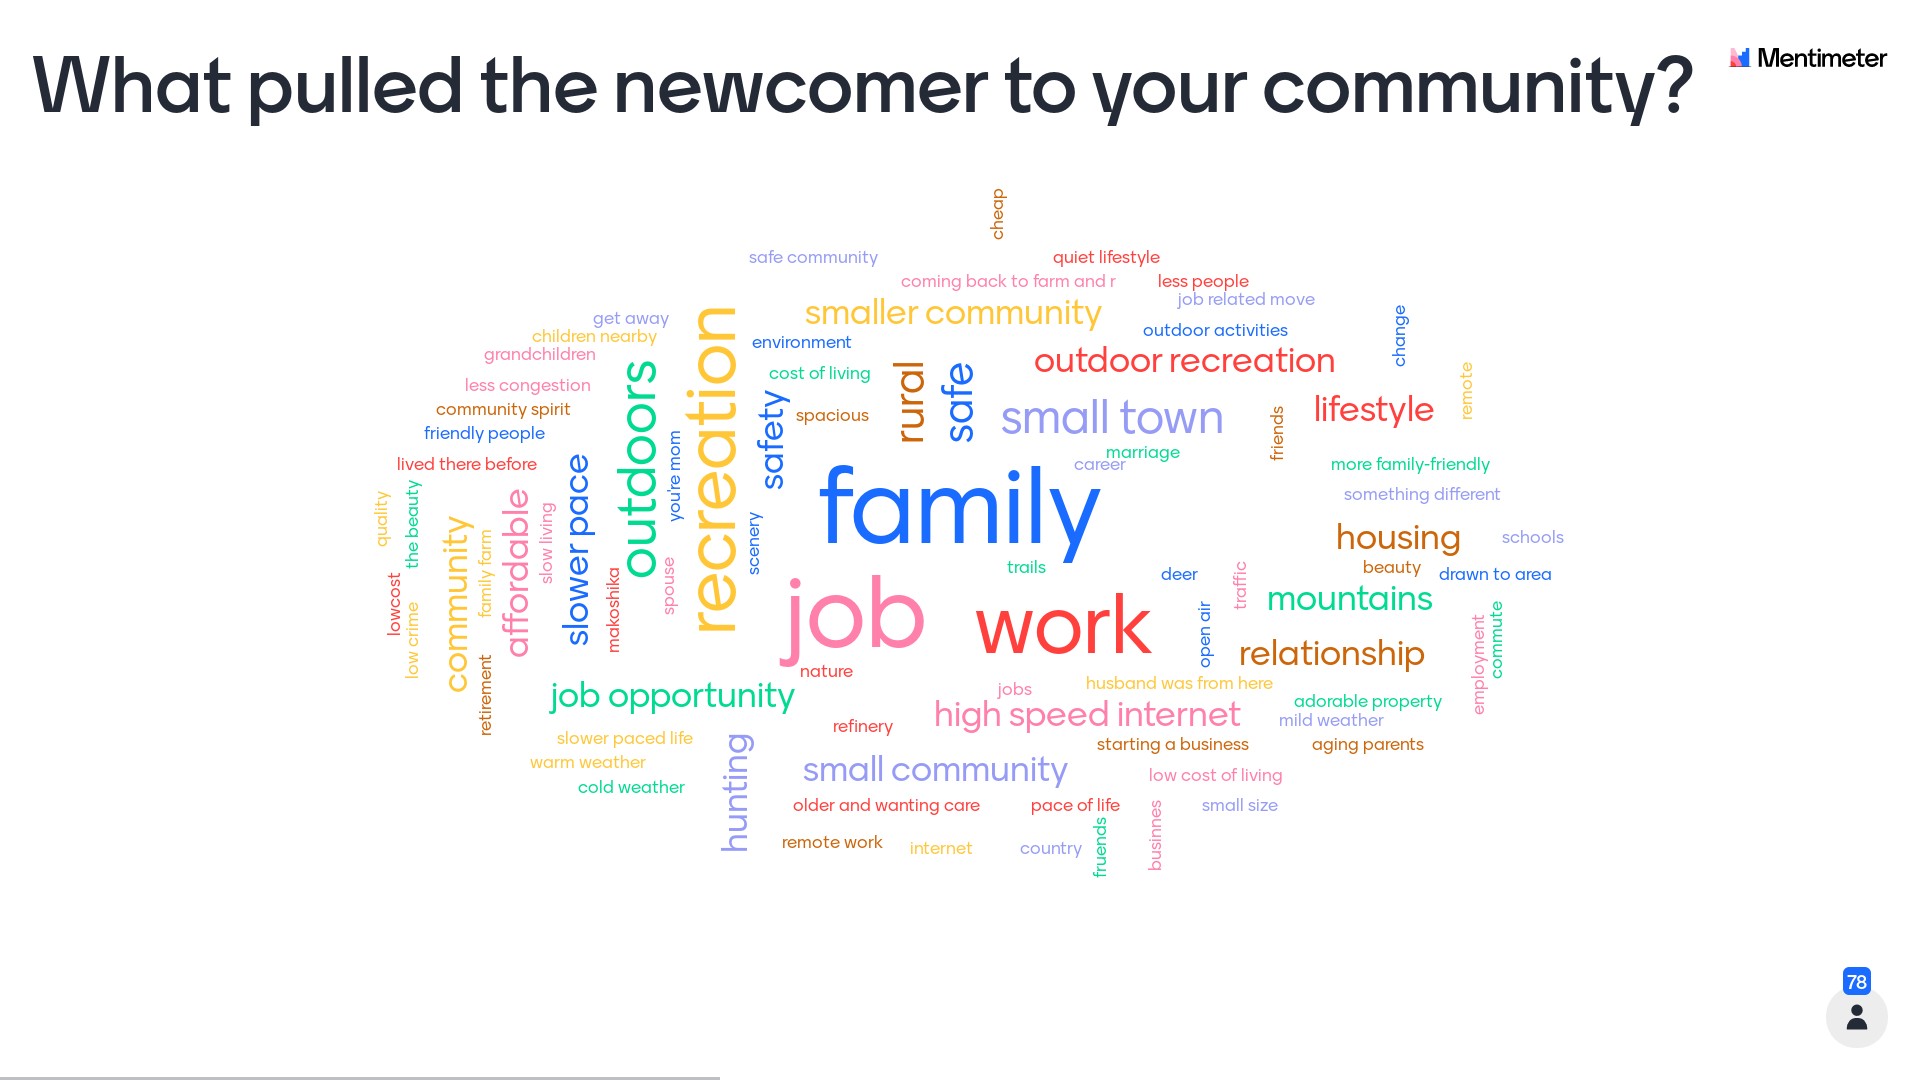 Colorful word cloud titled "What drew newcomers to your community"